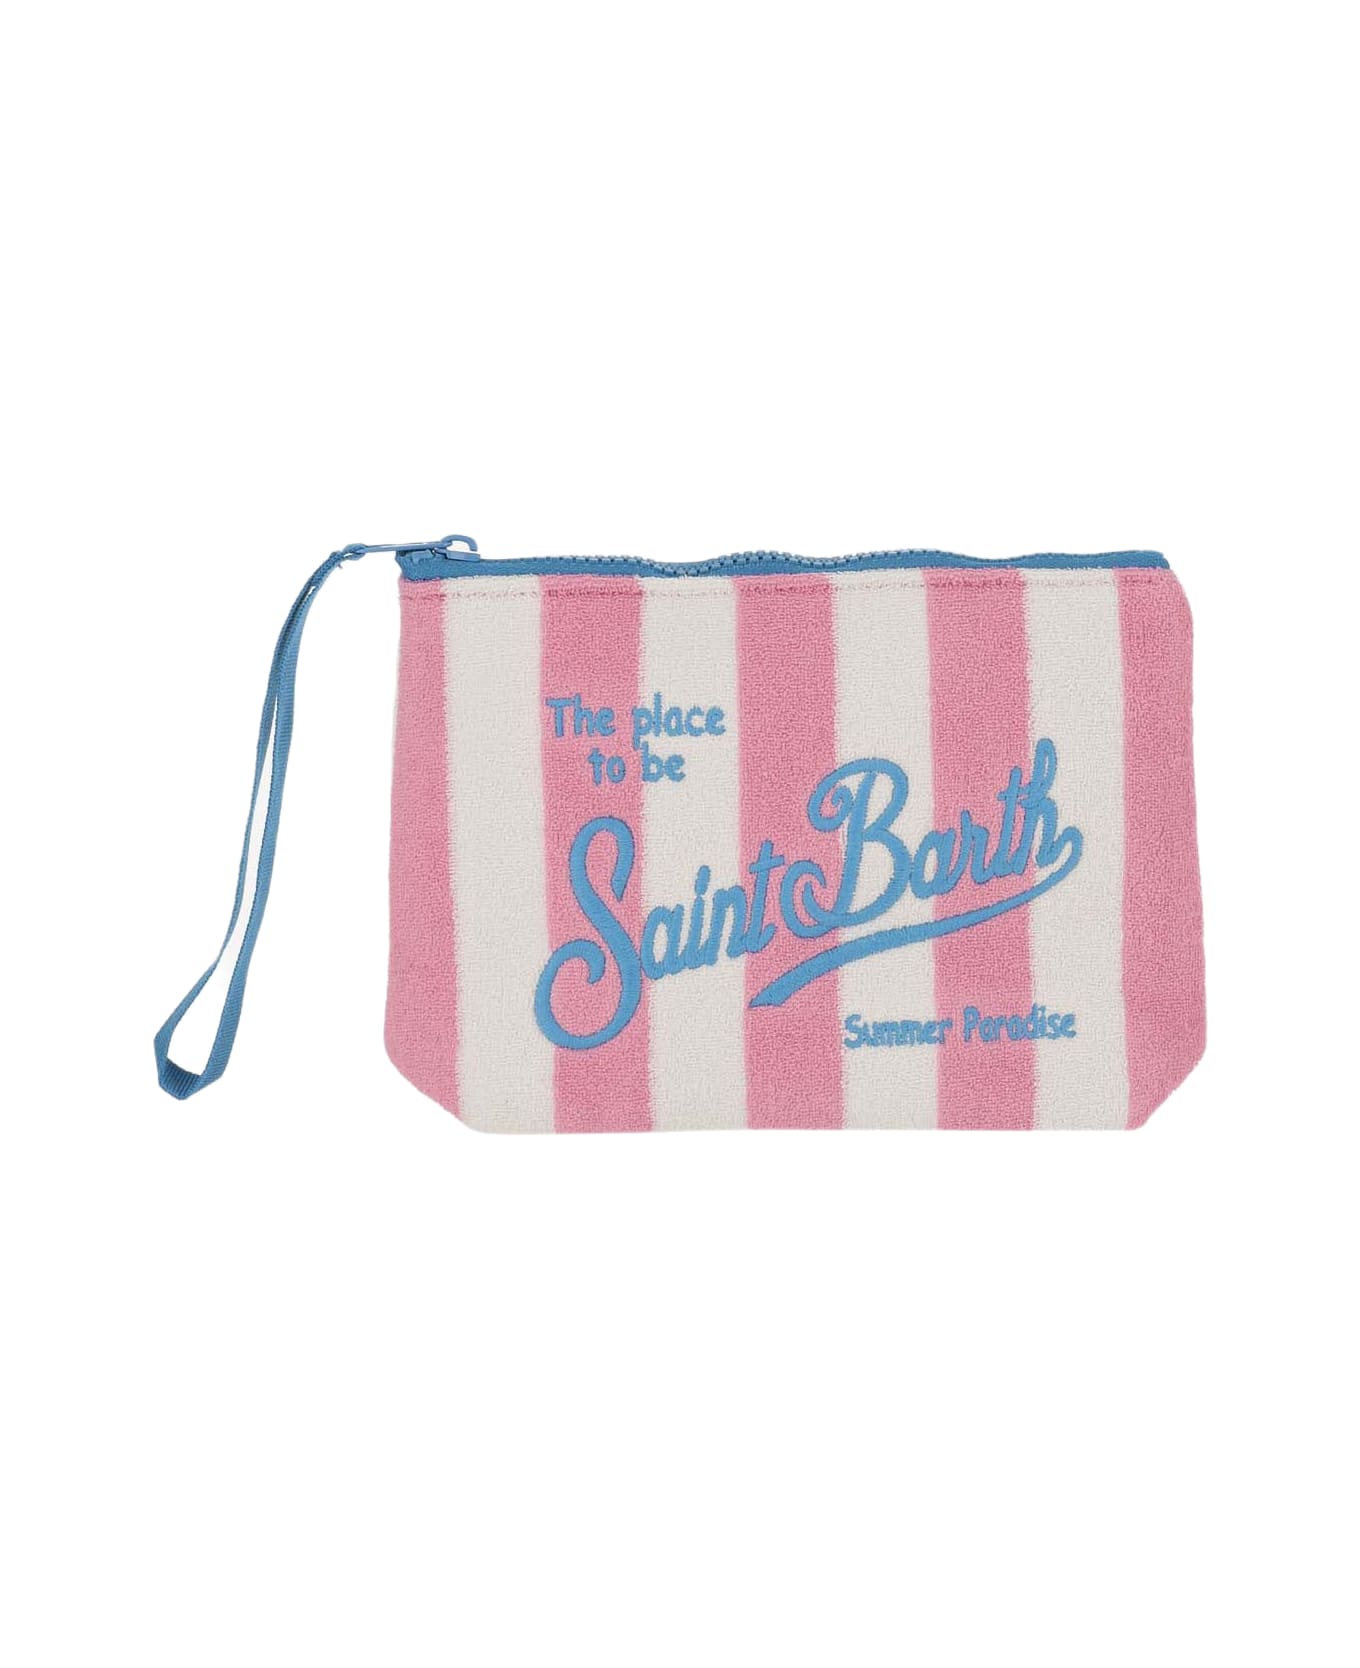 MC2 Saint Barth Fabric Clutch Bag With Striped Pattern - Red クラッチバッグ